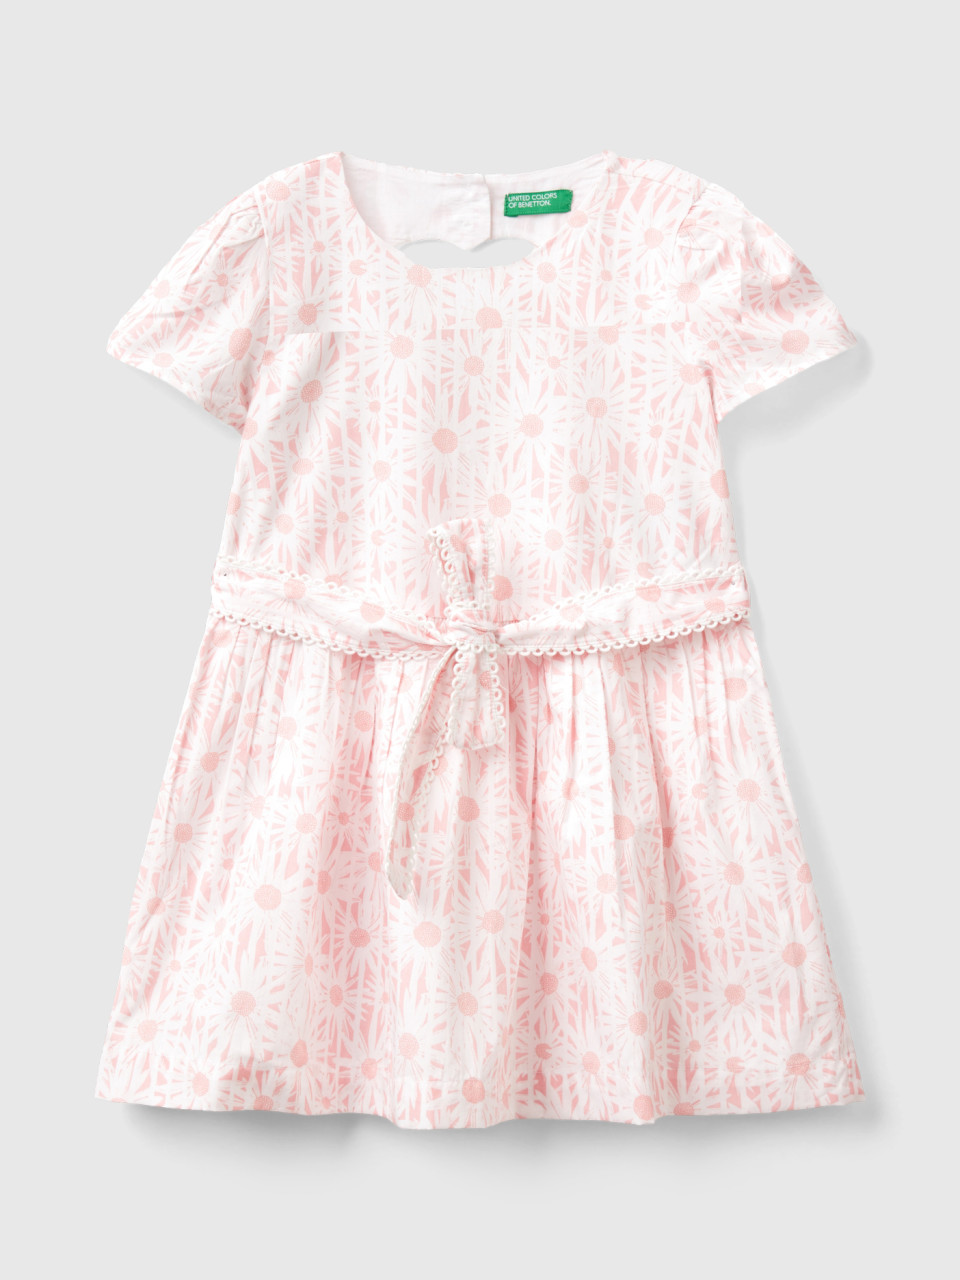 Benetton, Short Dress With Stripes And Flowers, Soft Pink, Kids